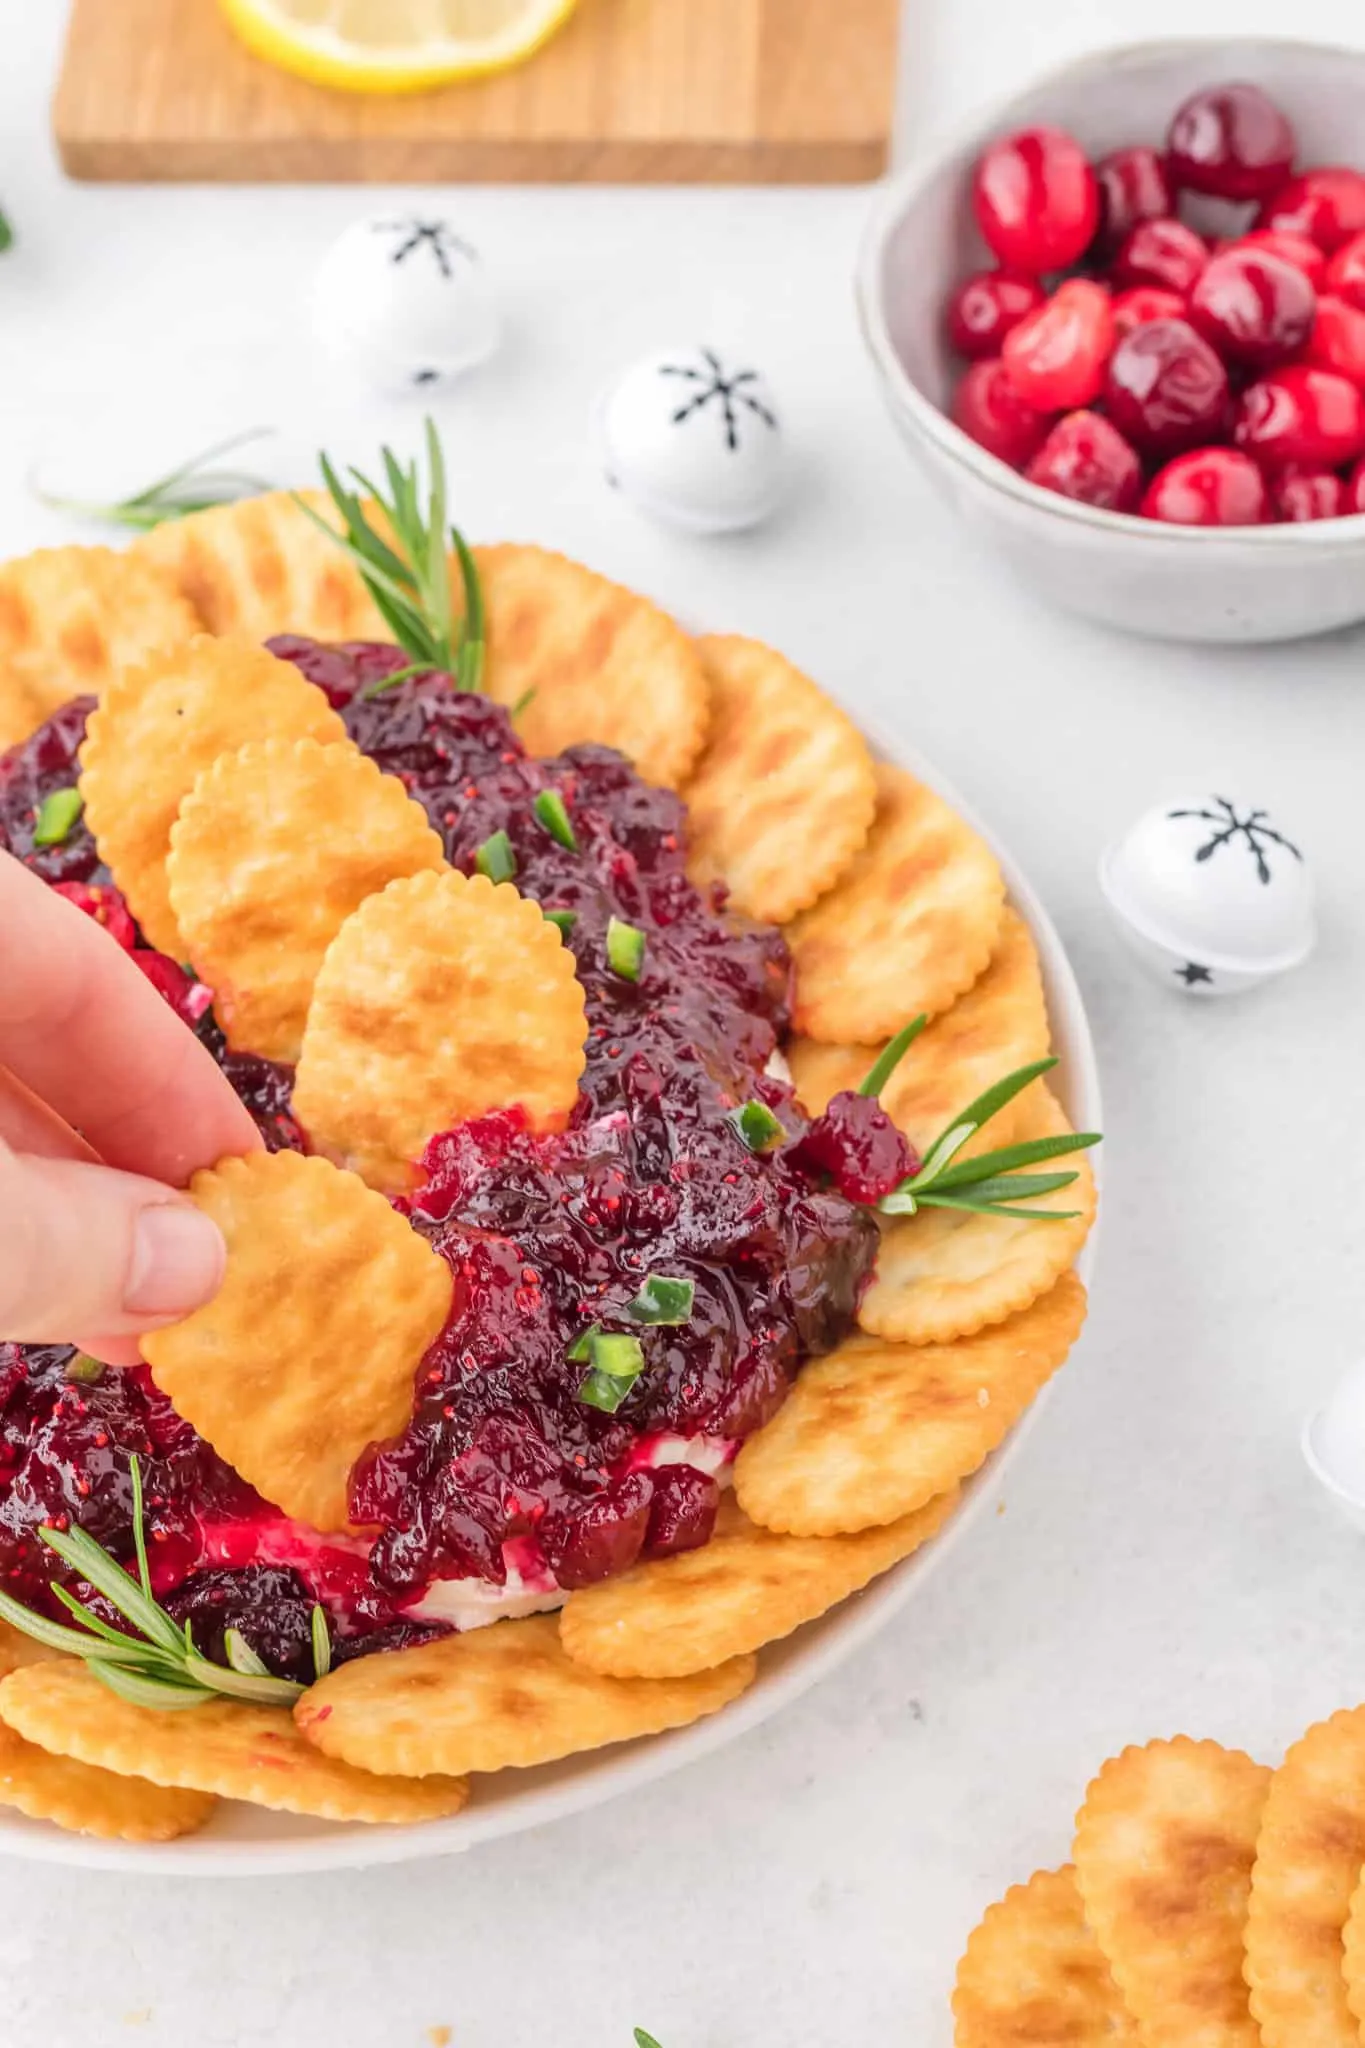 Cranberry Cream Cheese Dip is a delicious party dip recipe with a cream cheese jalapeno base topped with cranberry sauce.